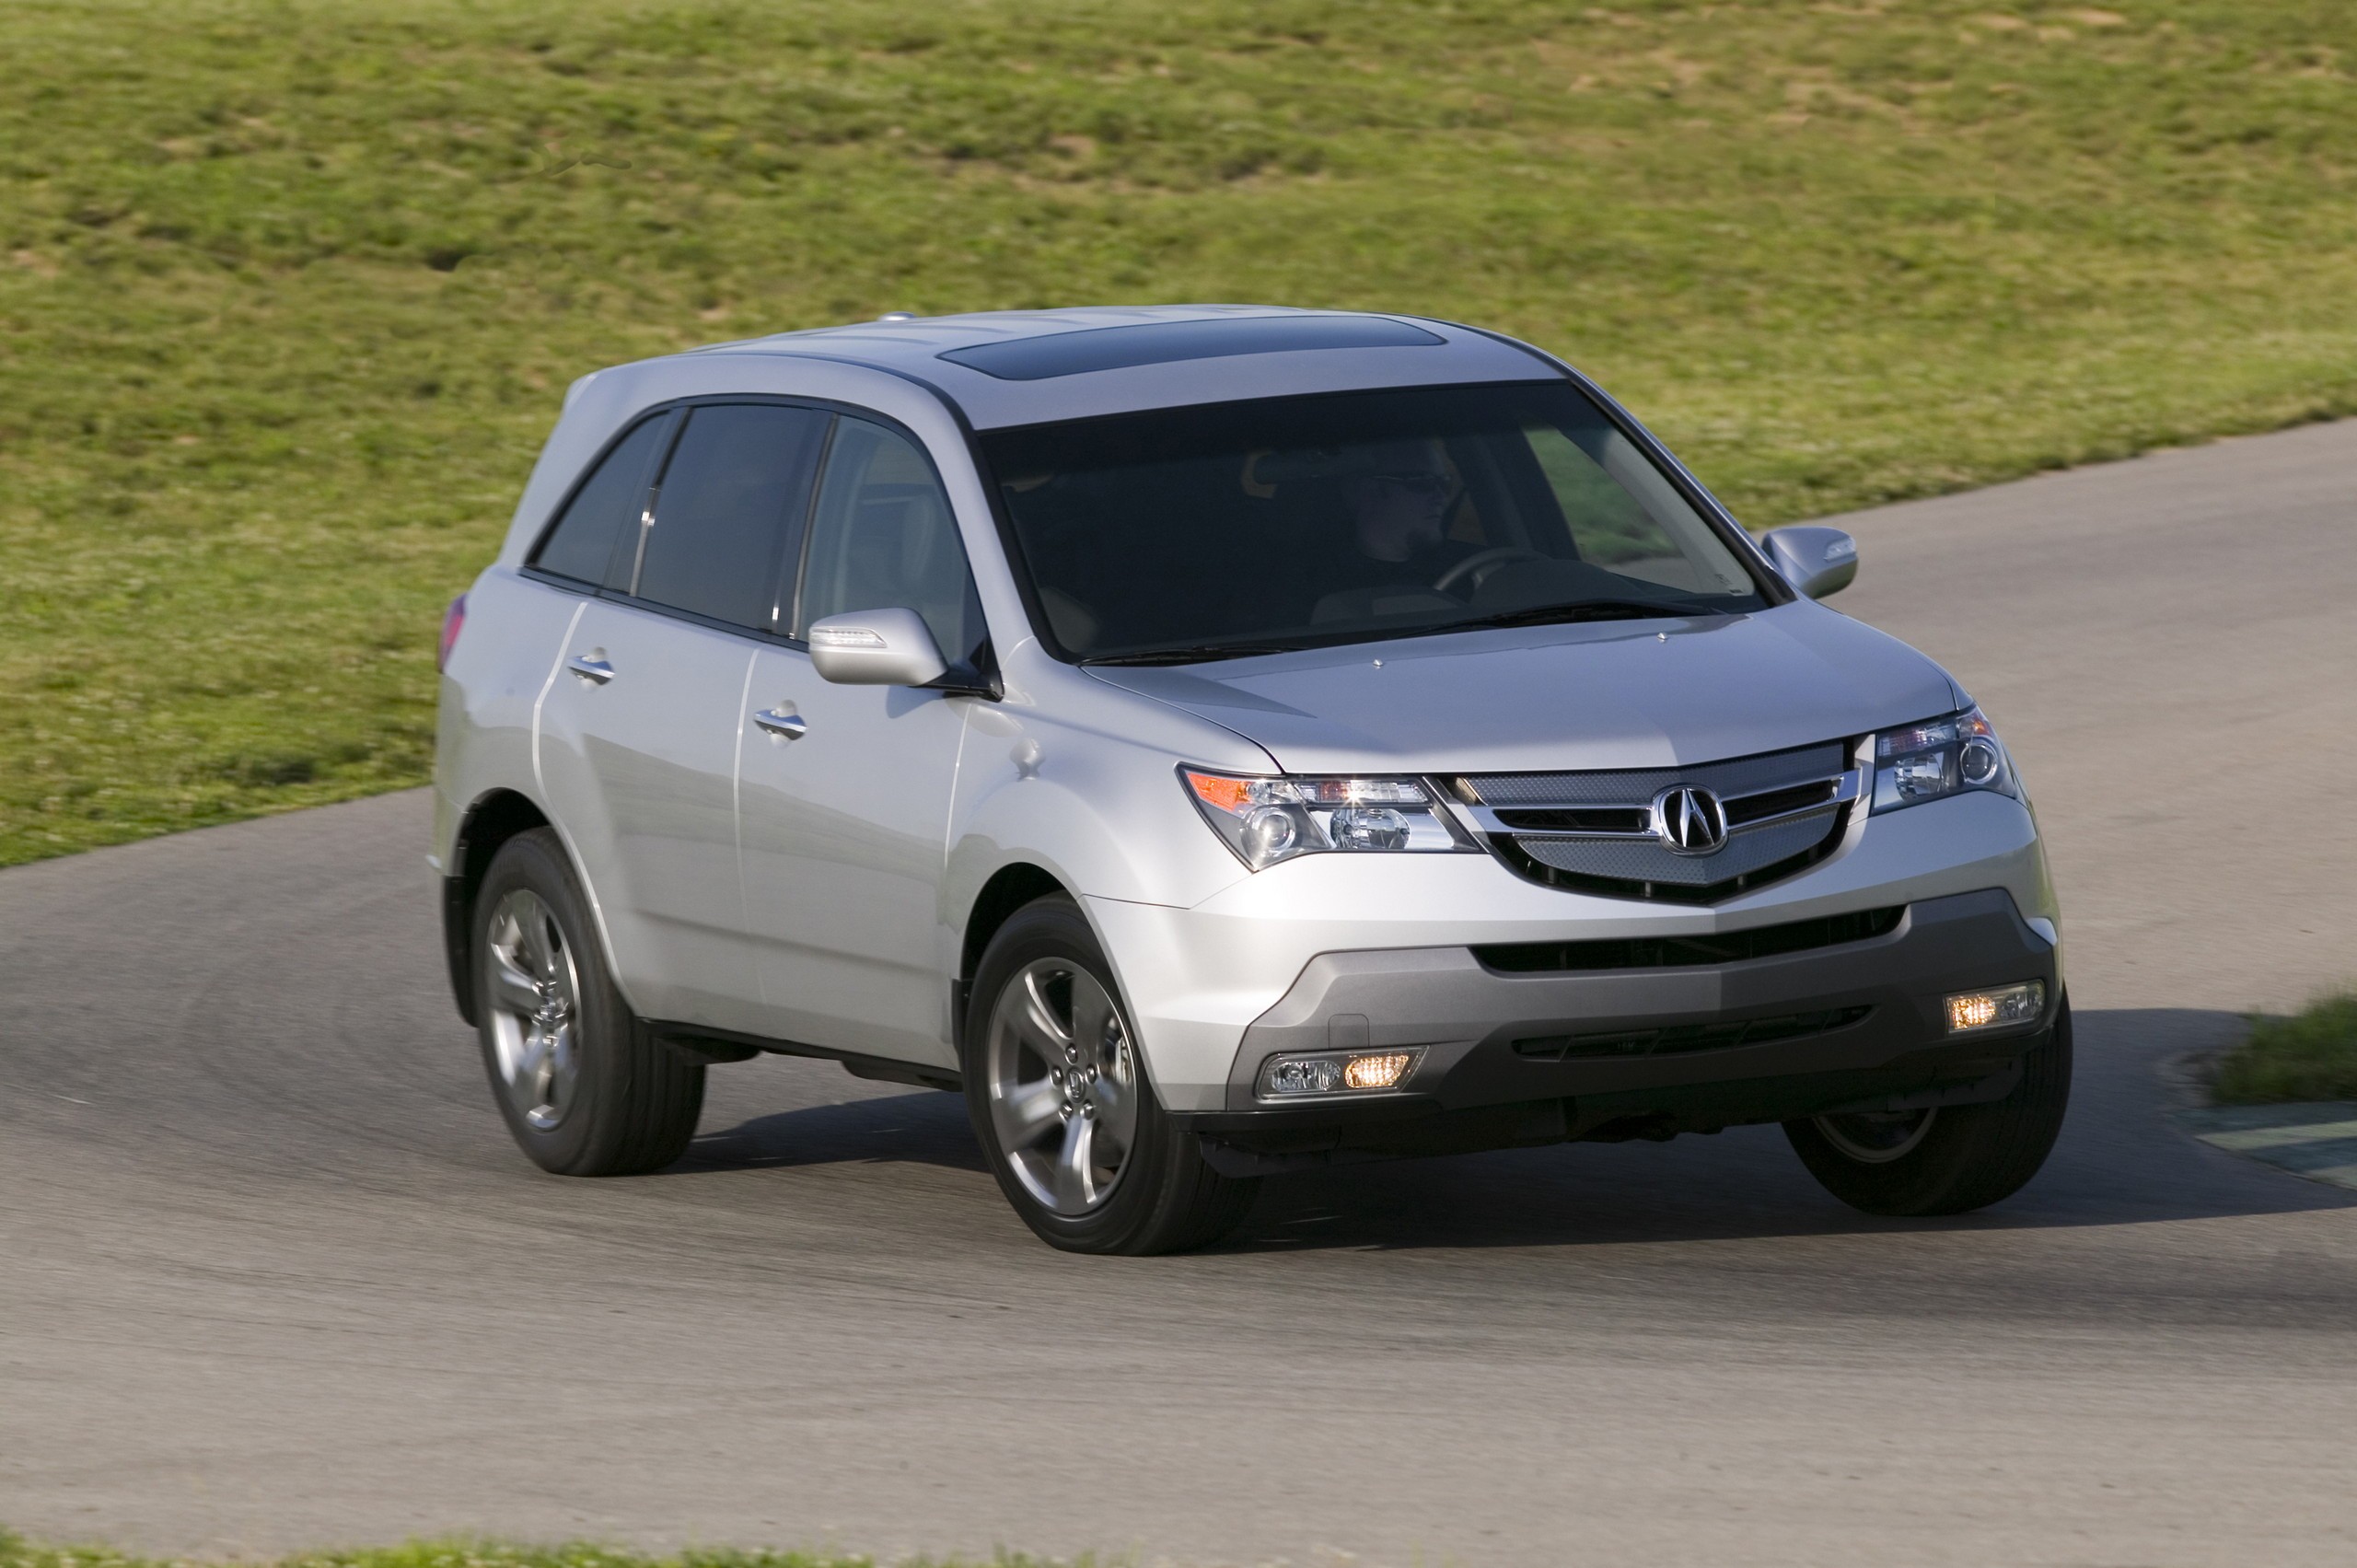 The Second Gen Acura Mdx Is An Unappreciated Classic Heres Why